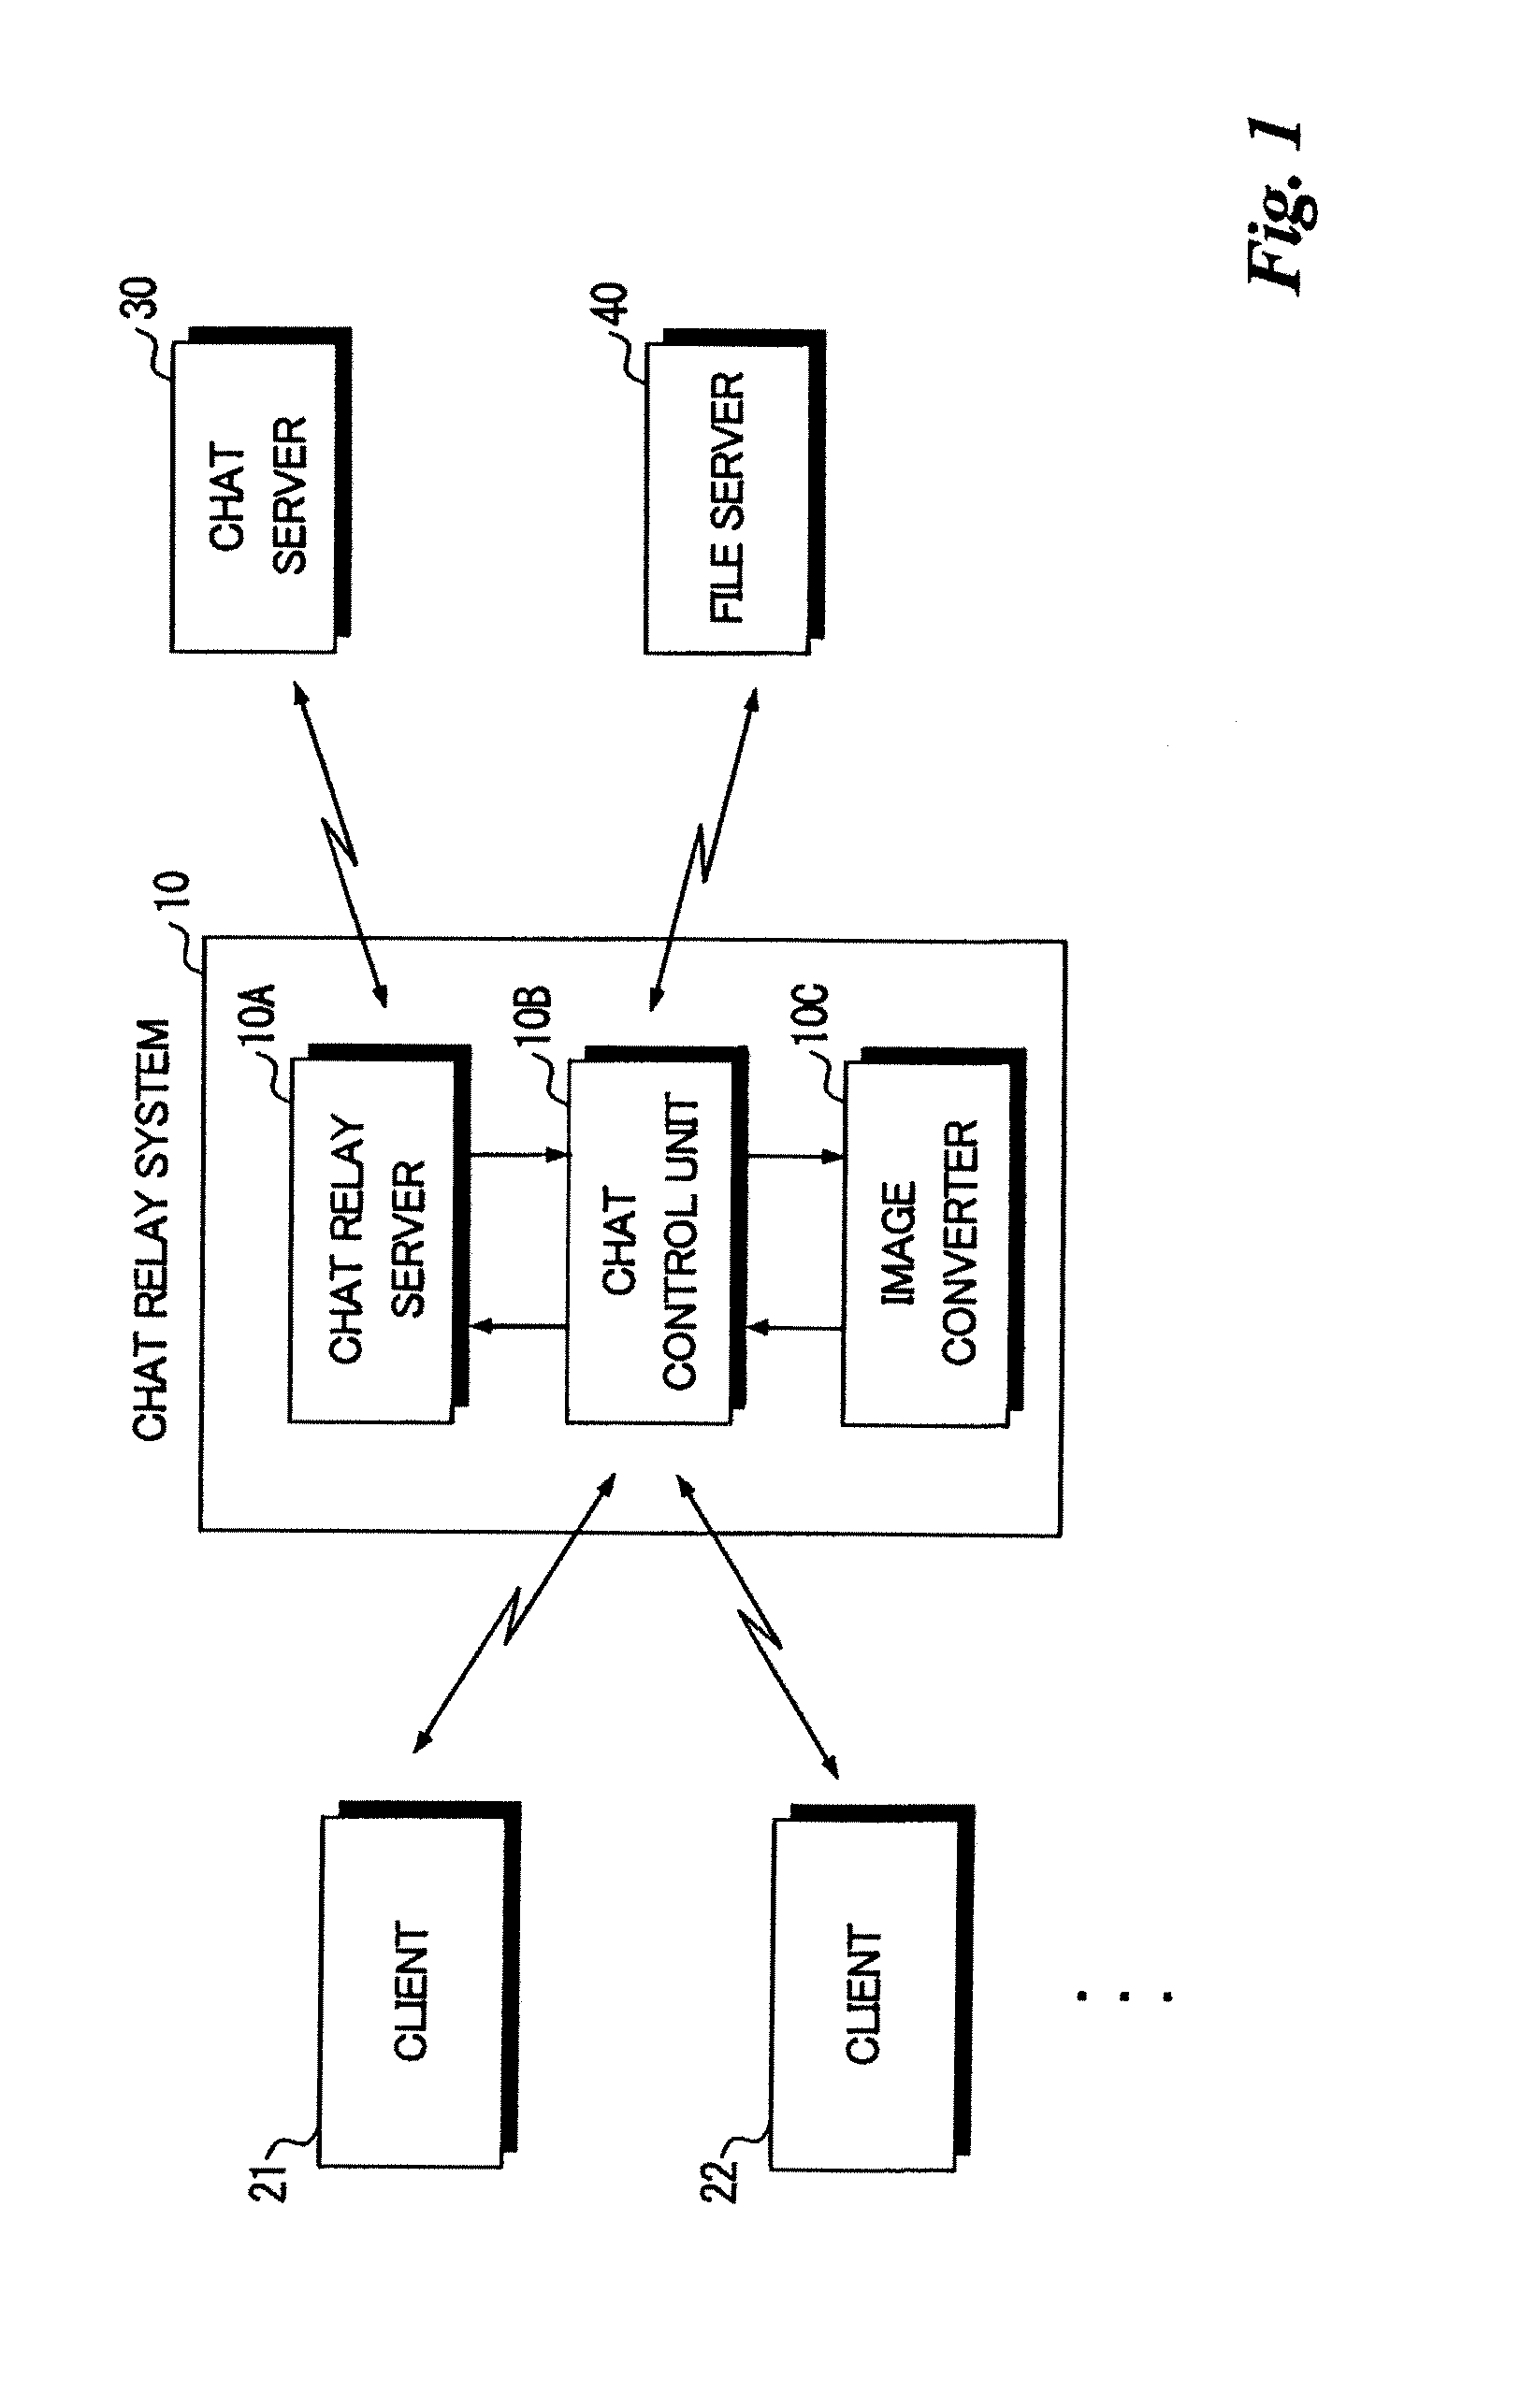 Chat relay server and chat terminal used in chat system, methods of controlling same, and chat system